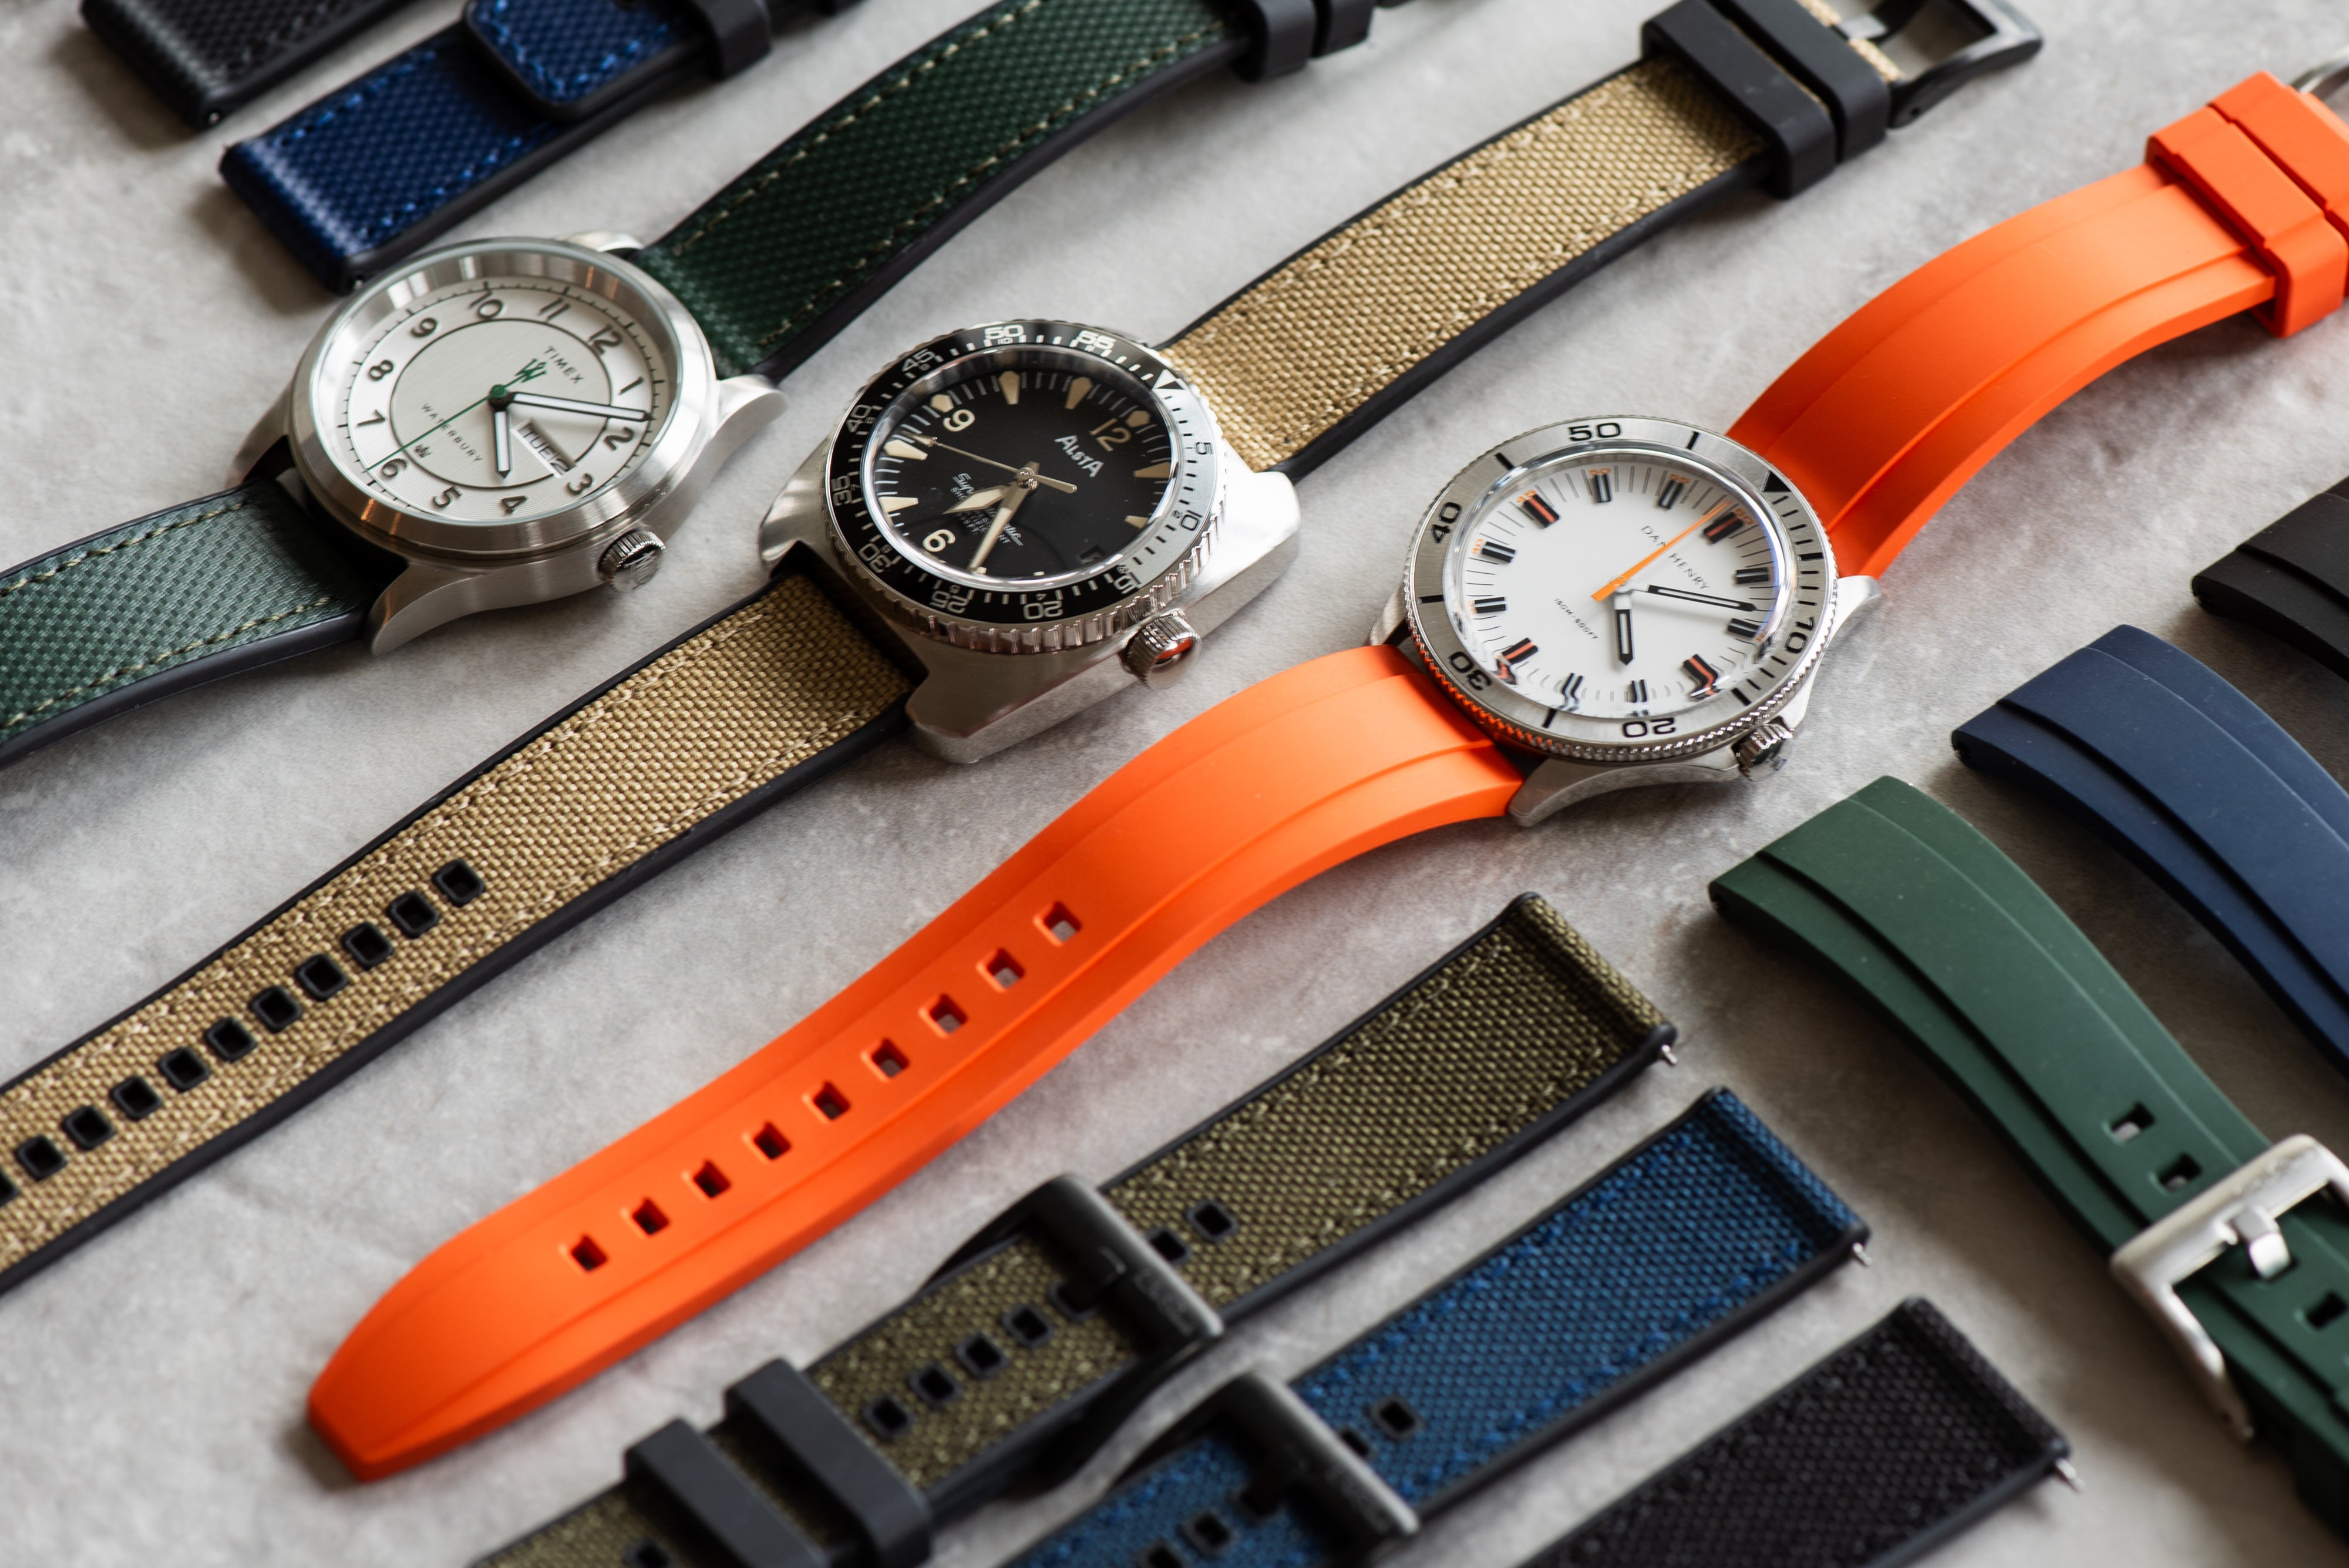 A premium brand of traditional watch straps and Apple watch bands